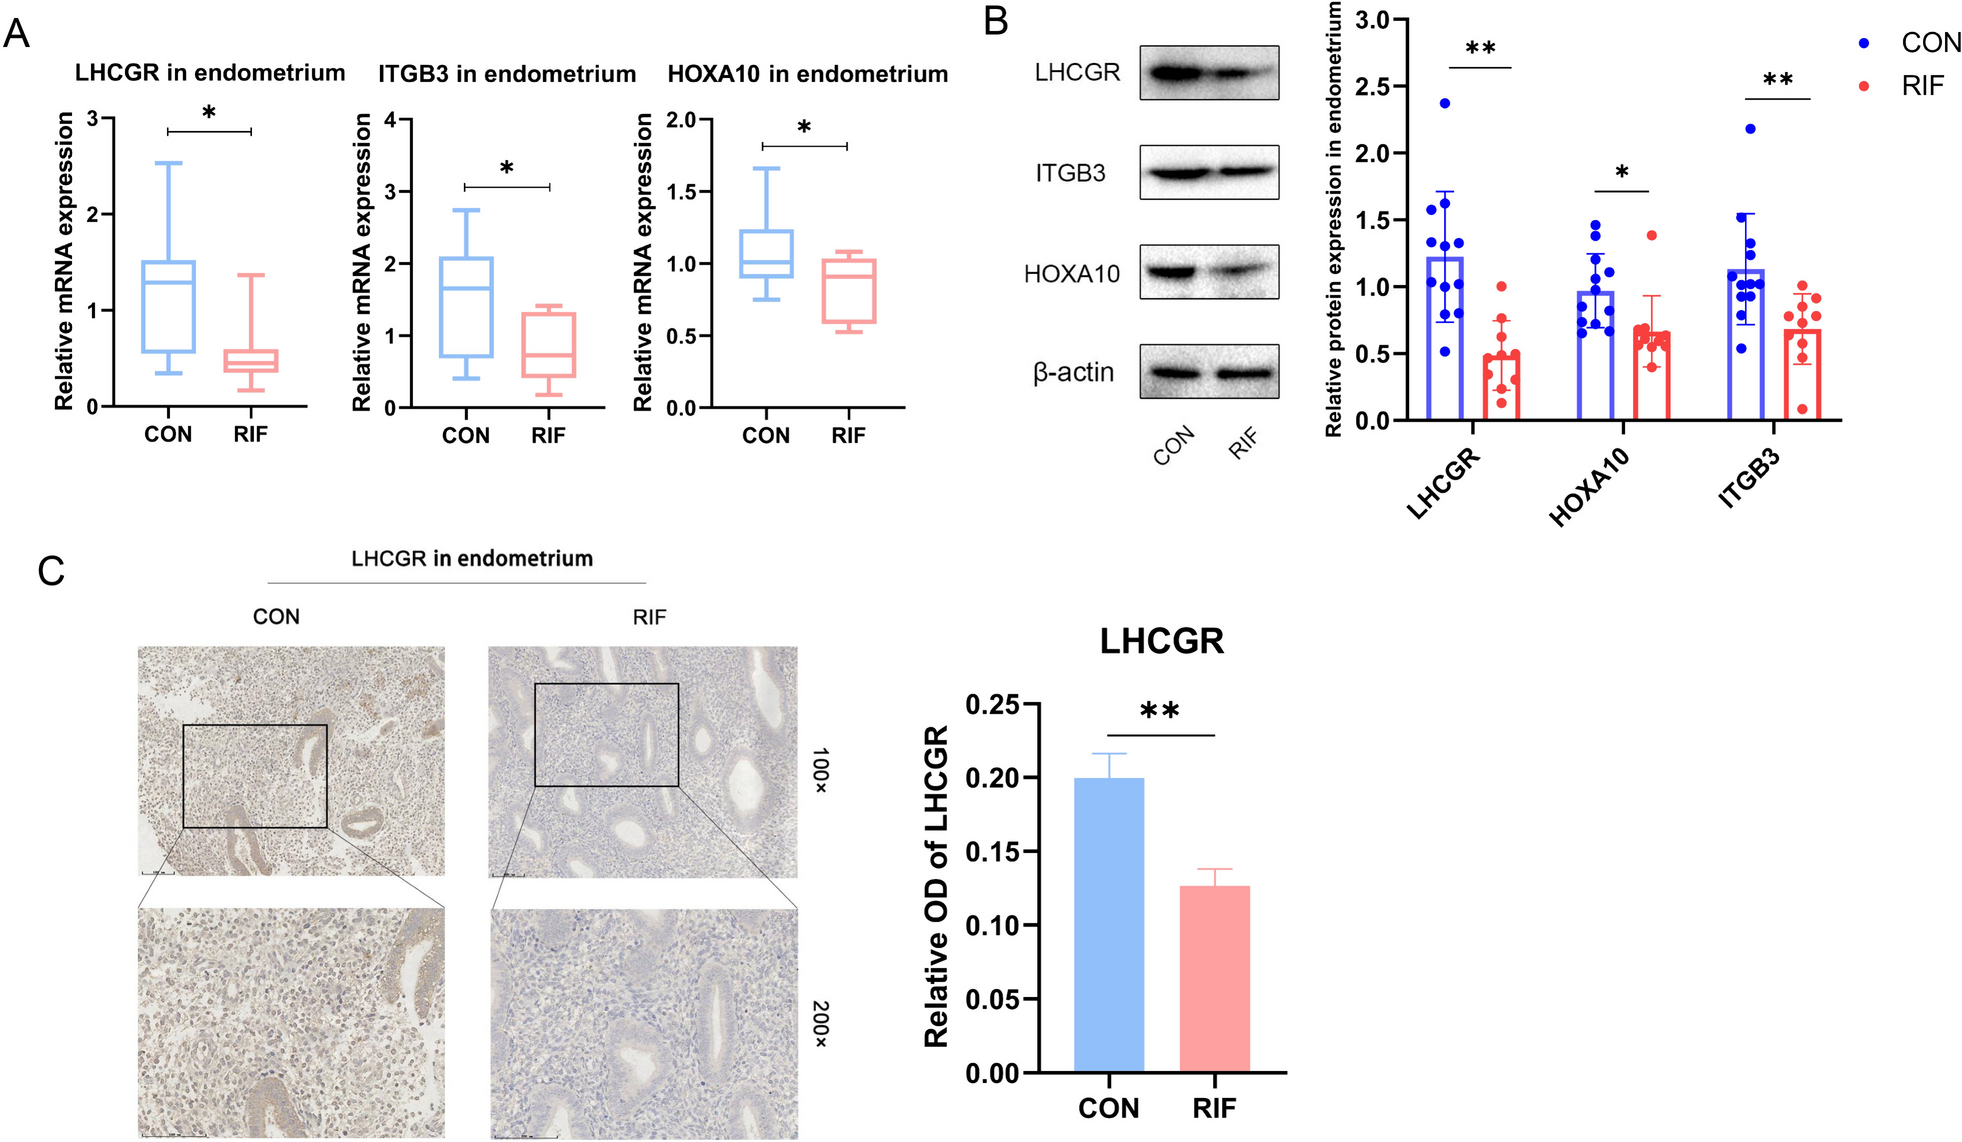 Enhancing endometrial receptivity: the roles of human chorionic gonadotropin in autophagy and apoptosis regulation in endometrial stromal cells